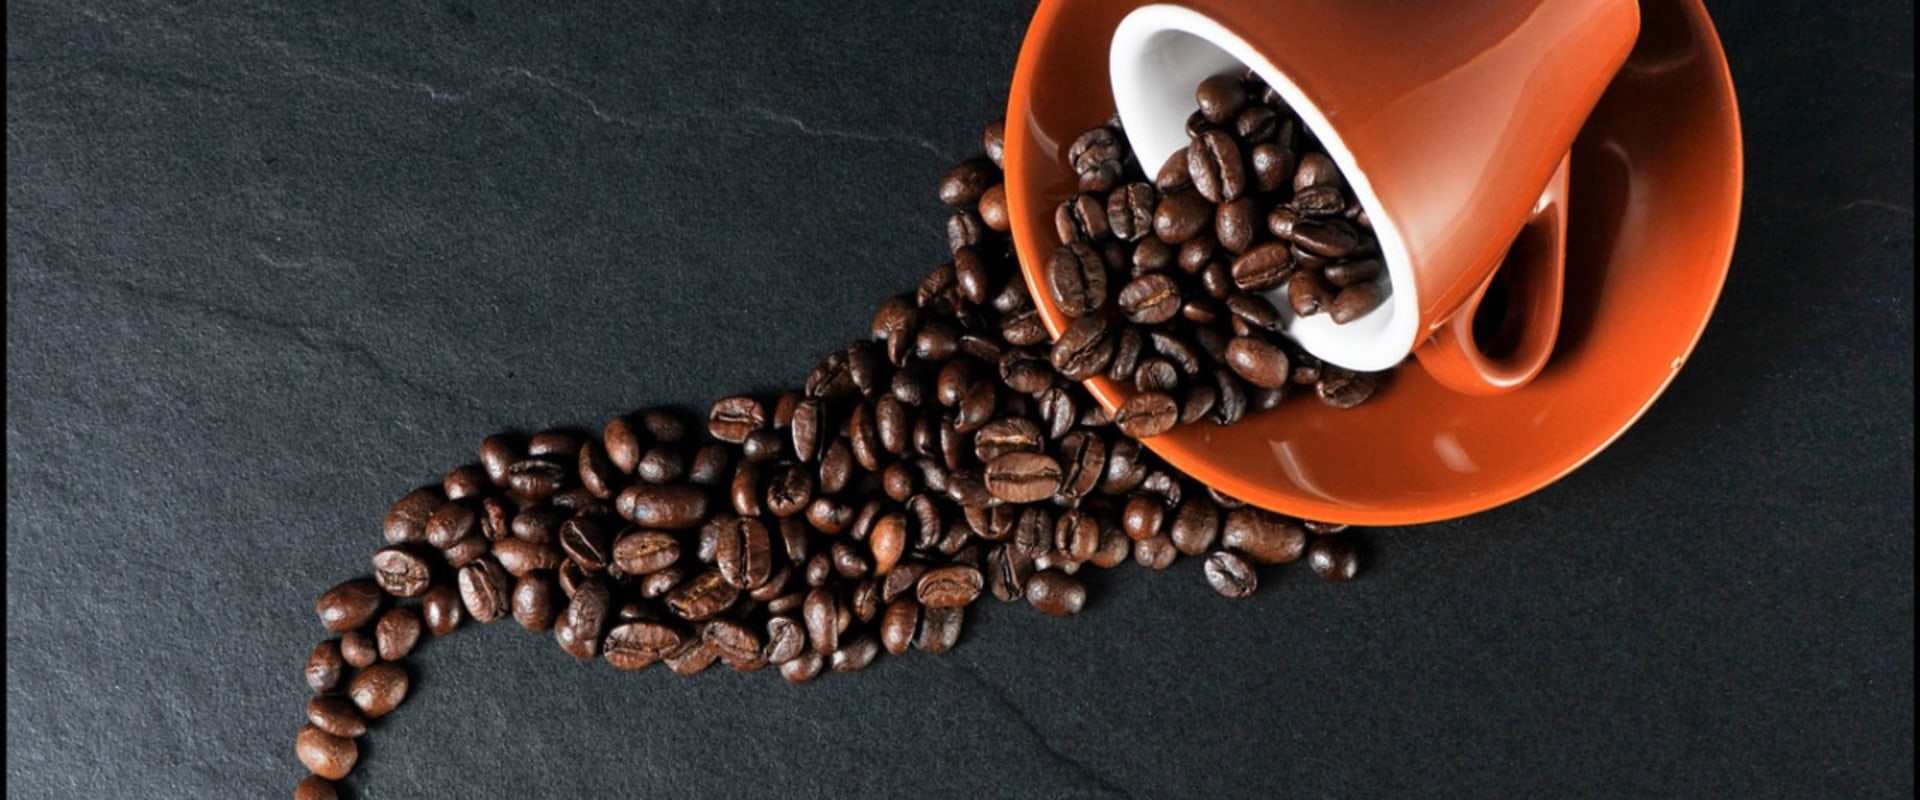 Is Coffee Bad For You? Health Benefits & Disadvantages